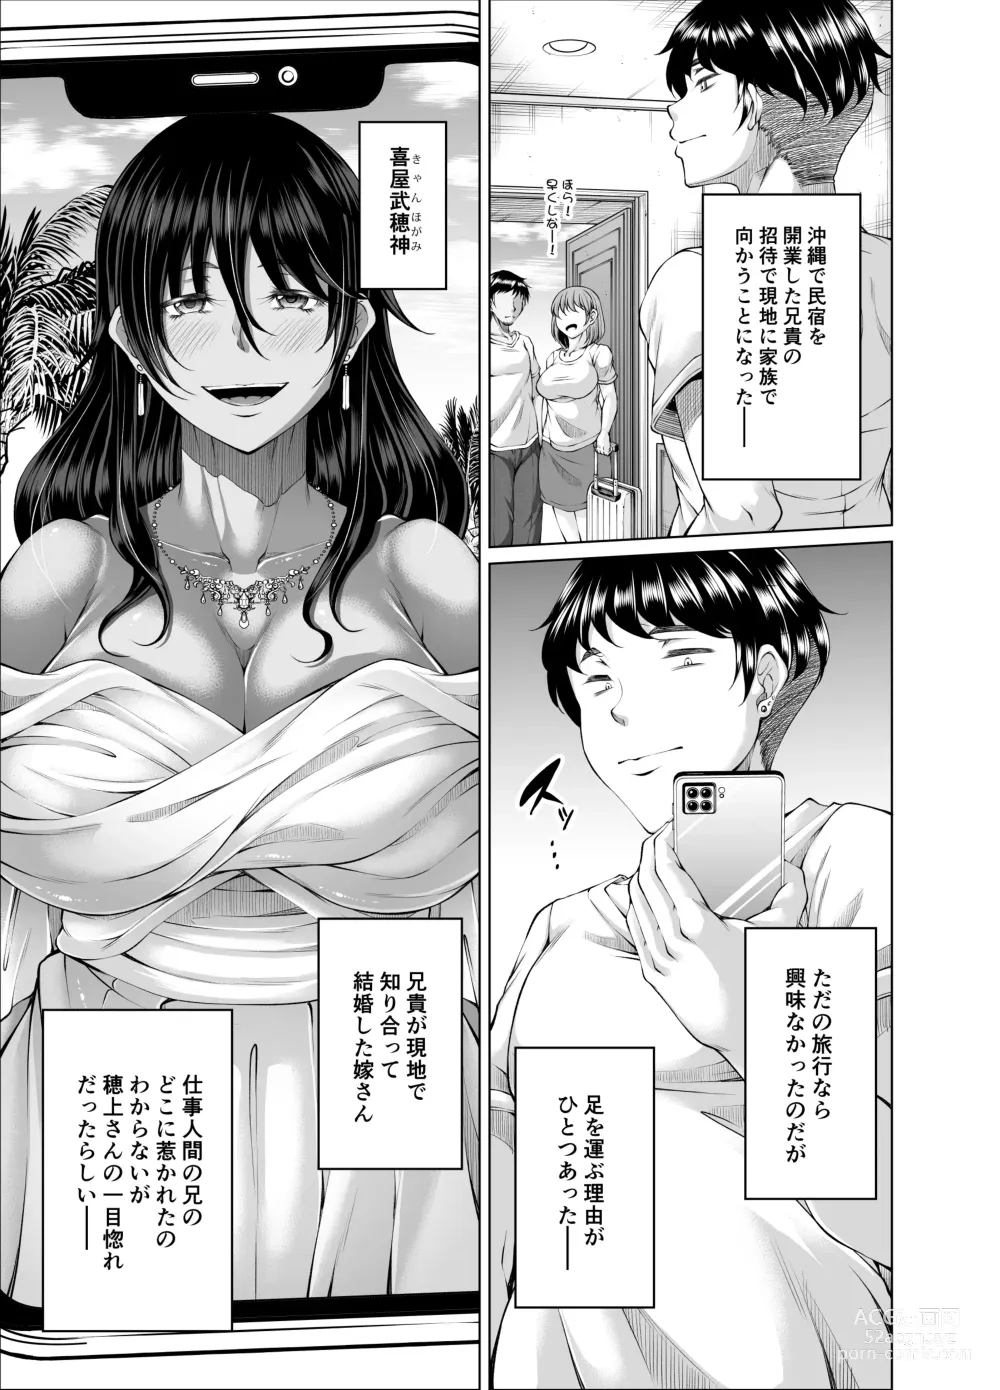 Page 4 of doujinshi 琉球勝気兄嫁は押しに弱くて欲求不満